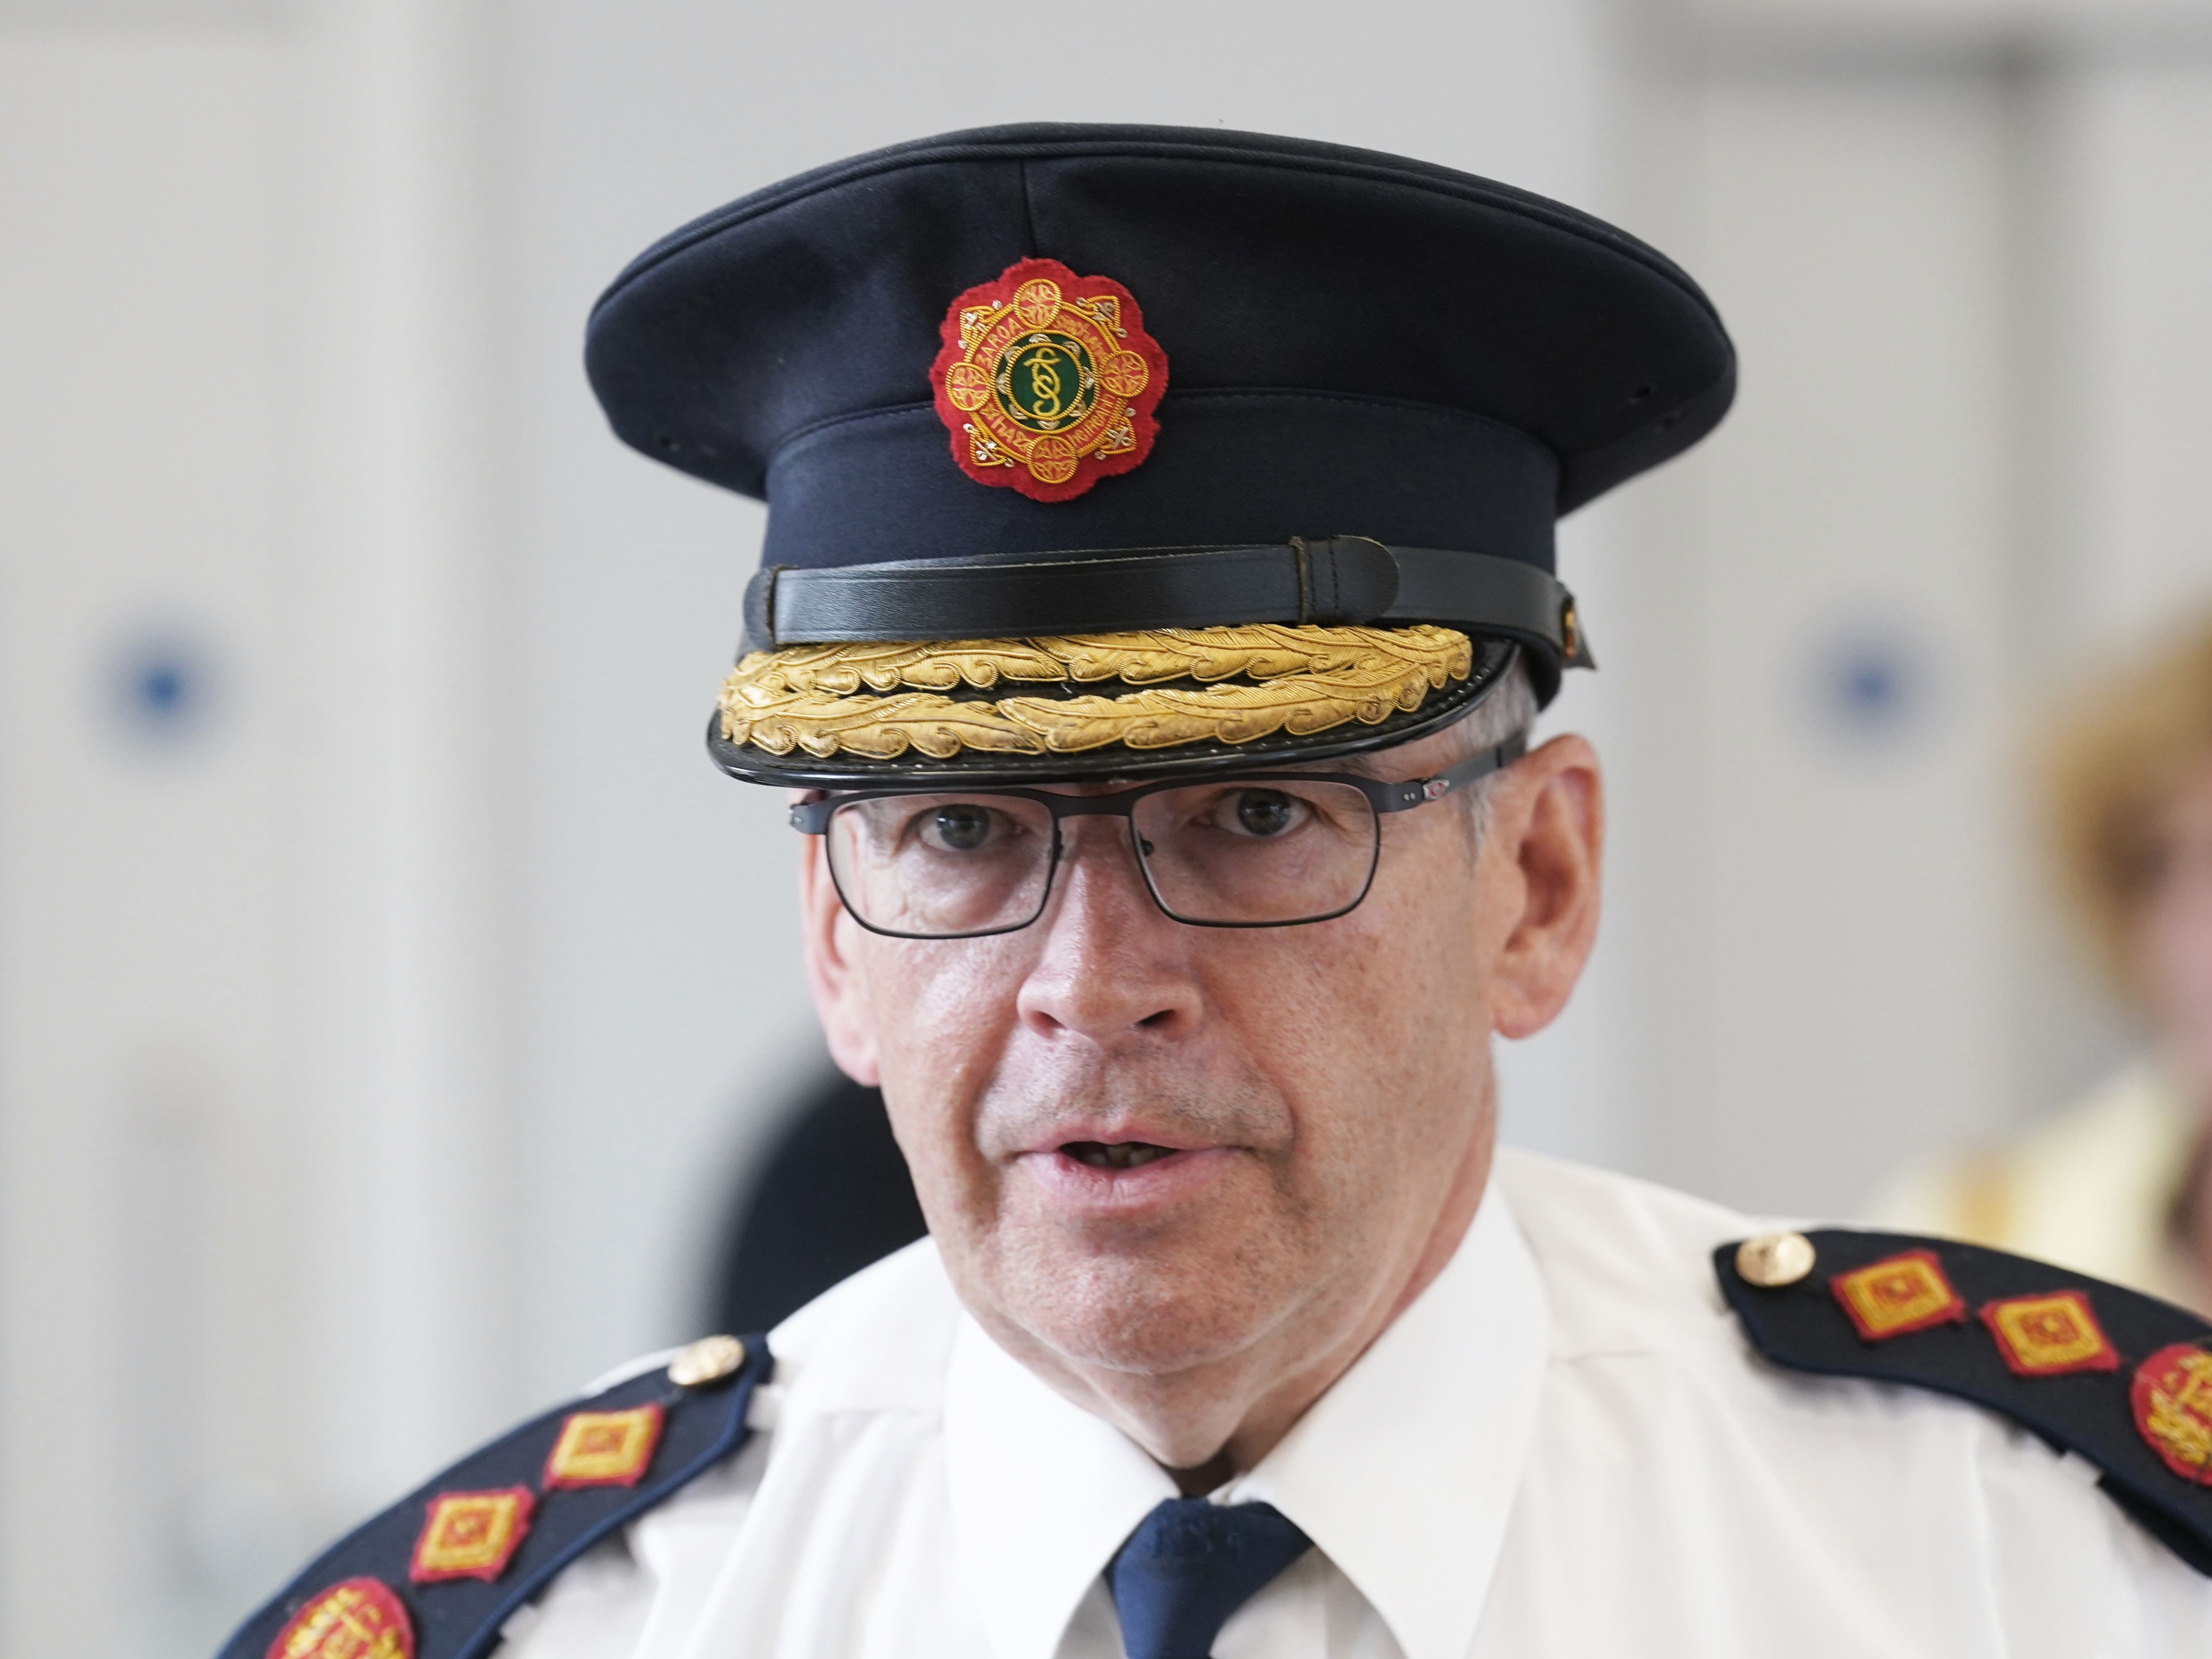 Garda commissioner challenged over requests to media to hand over riot images